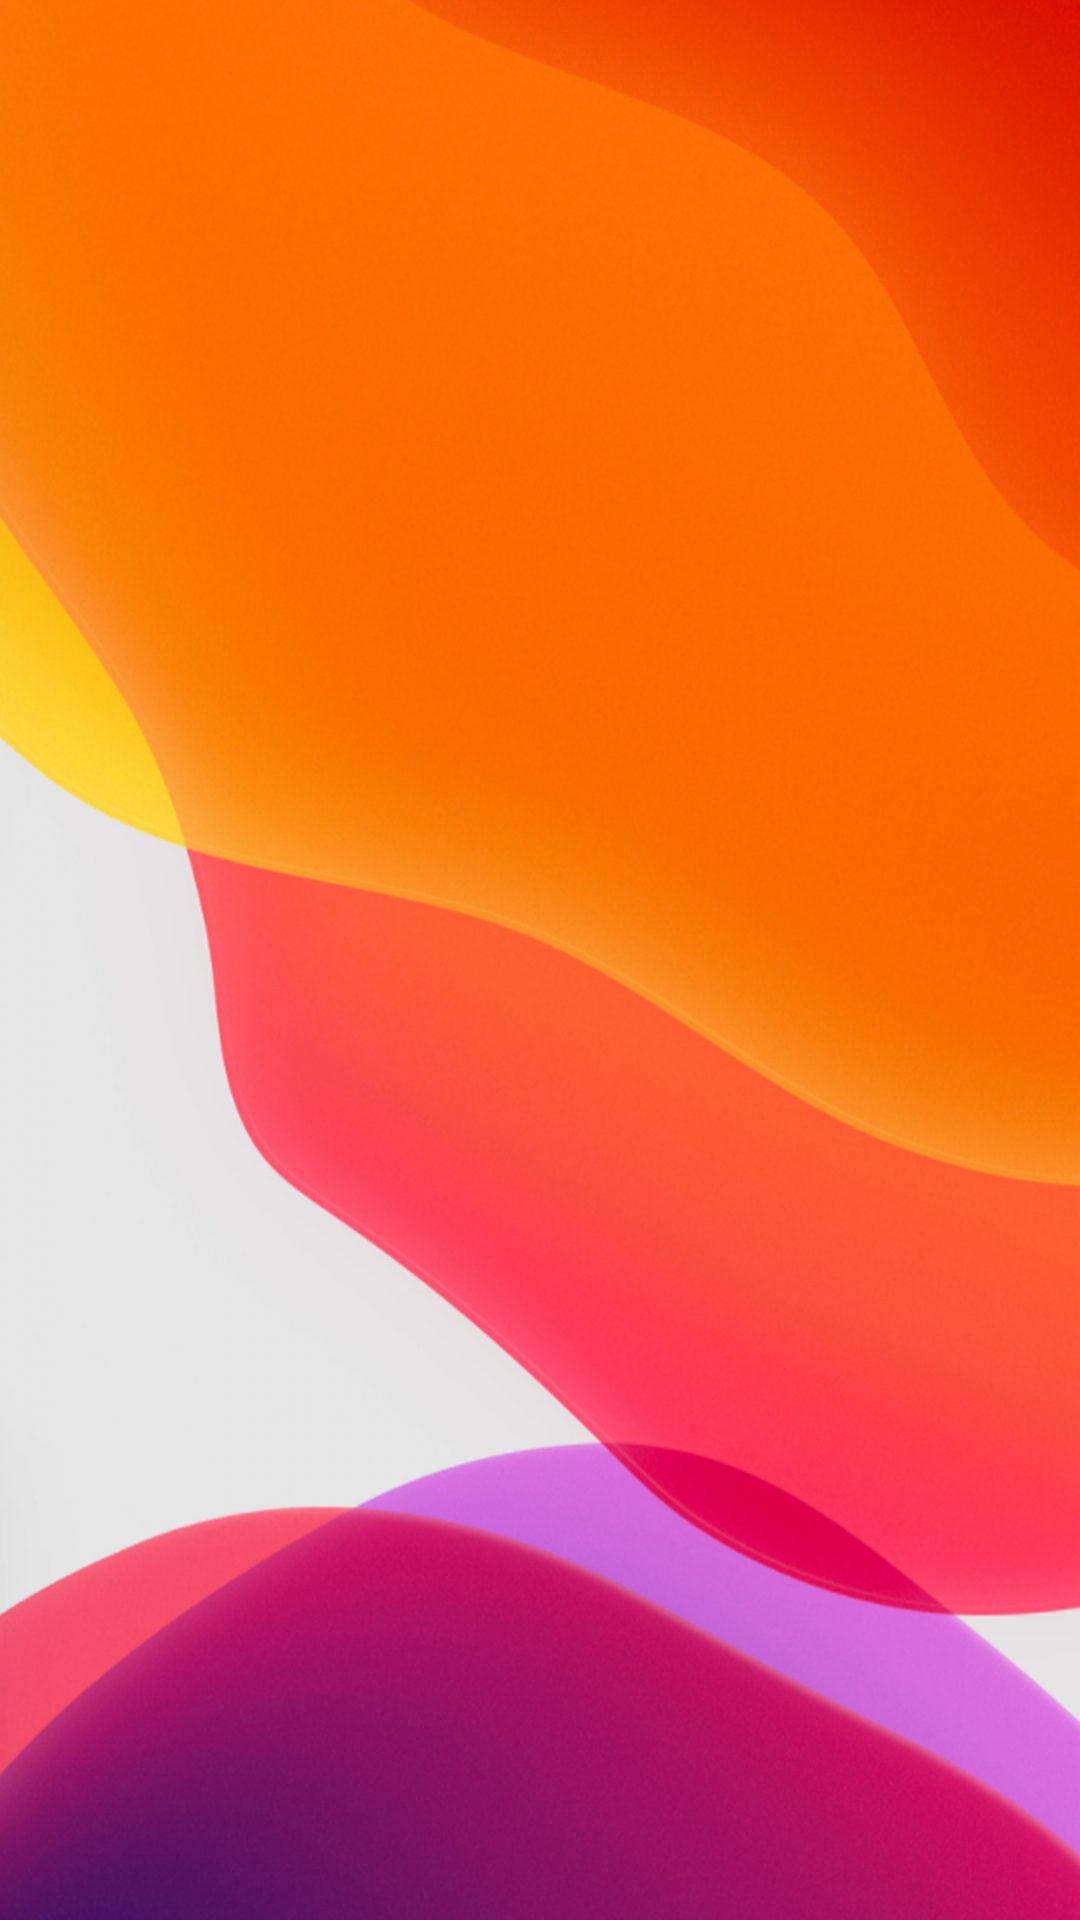 Ios 13 Wallpapers Hd 4